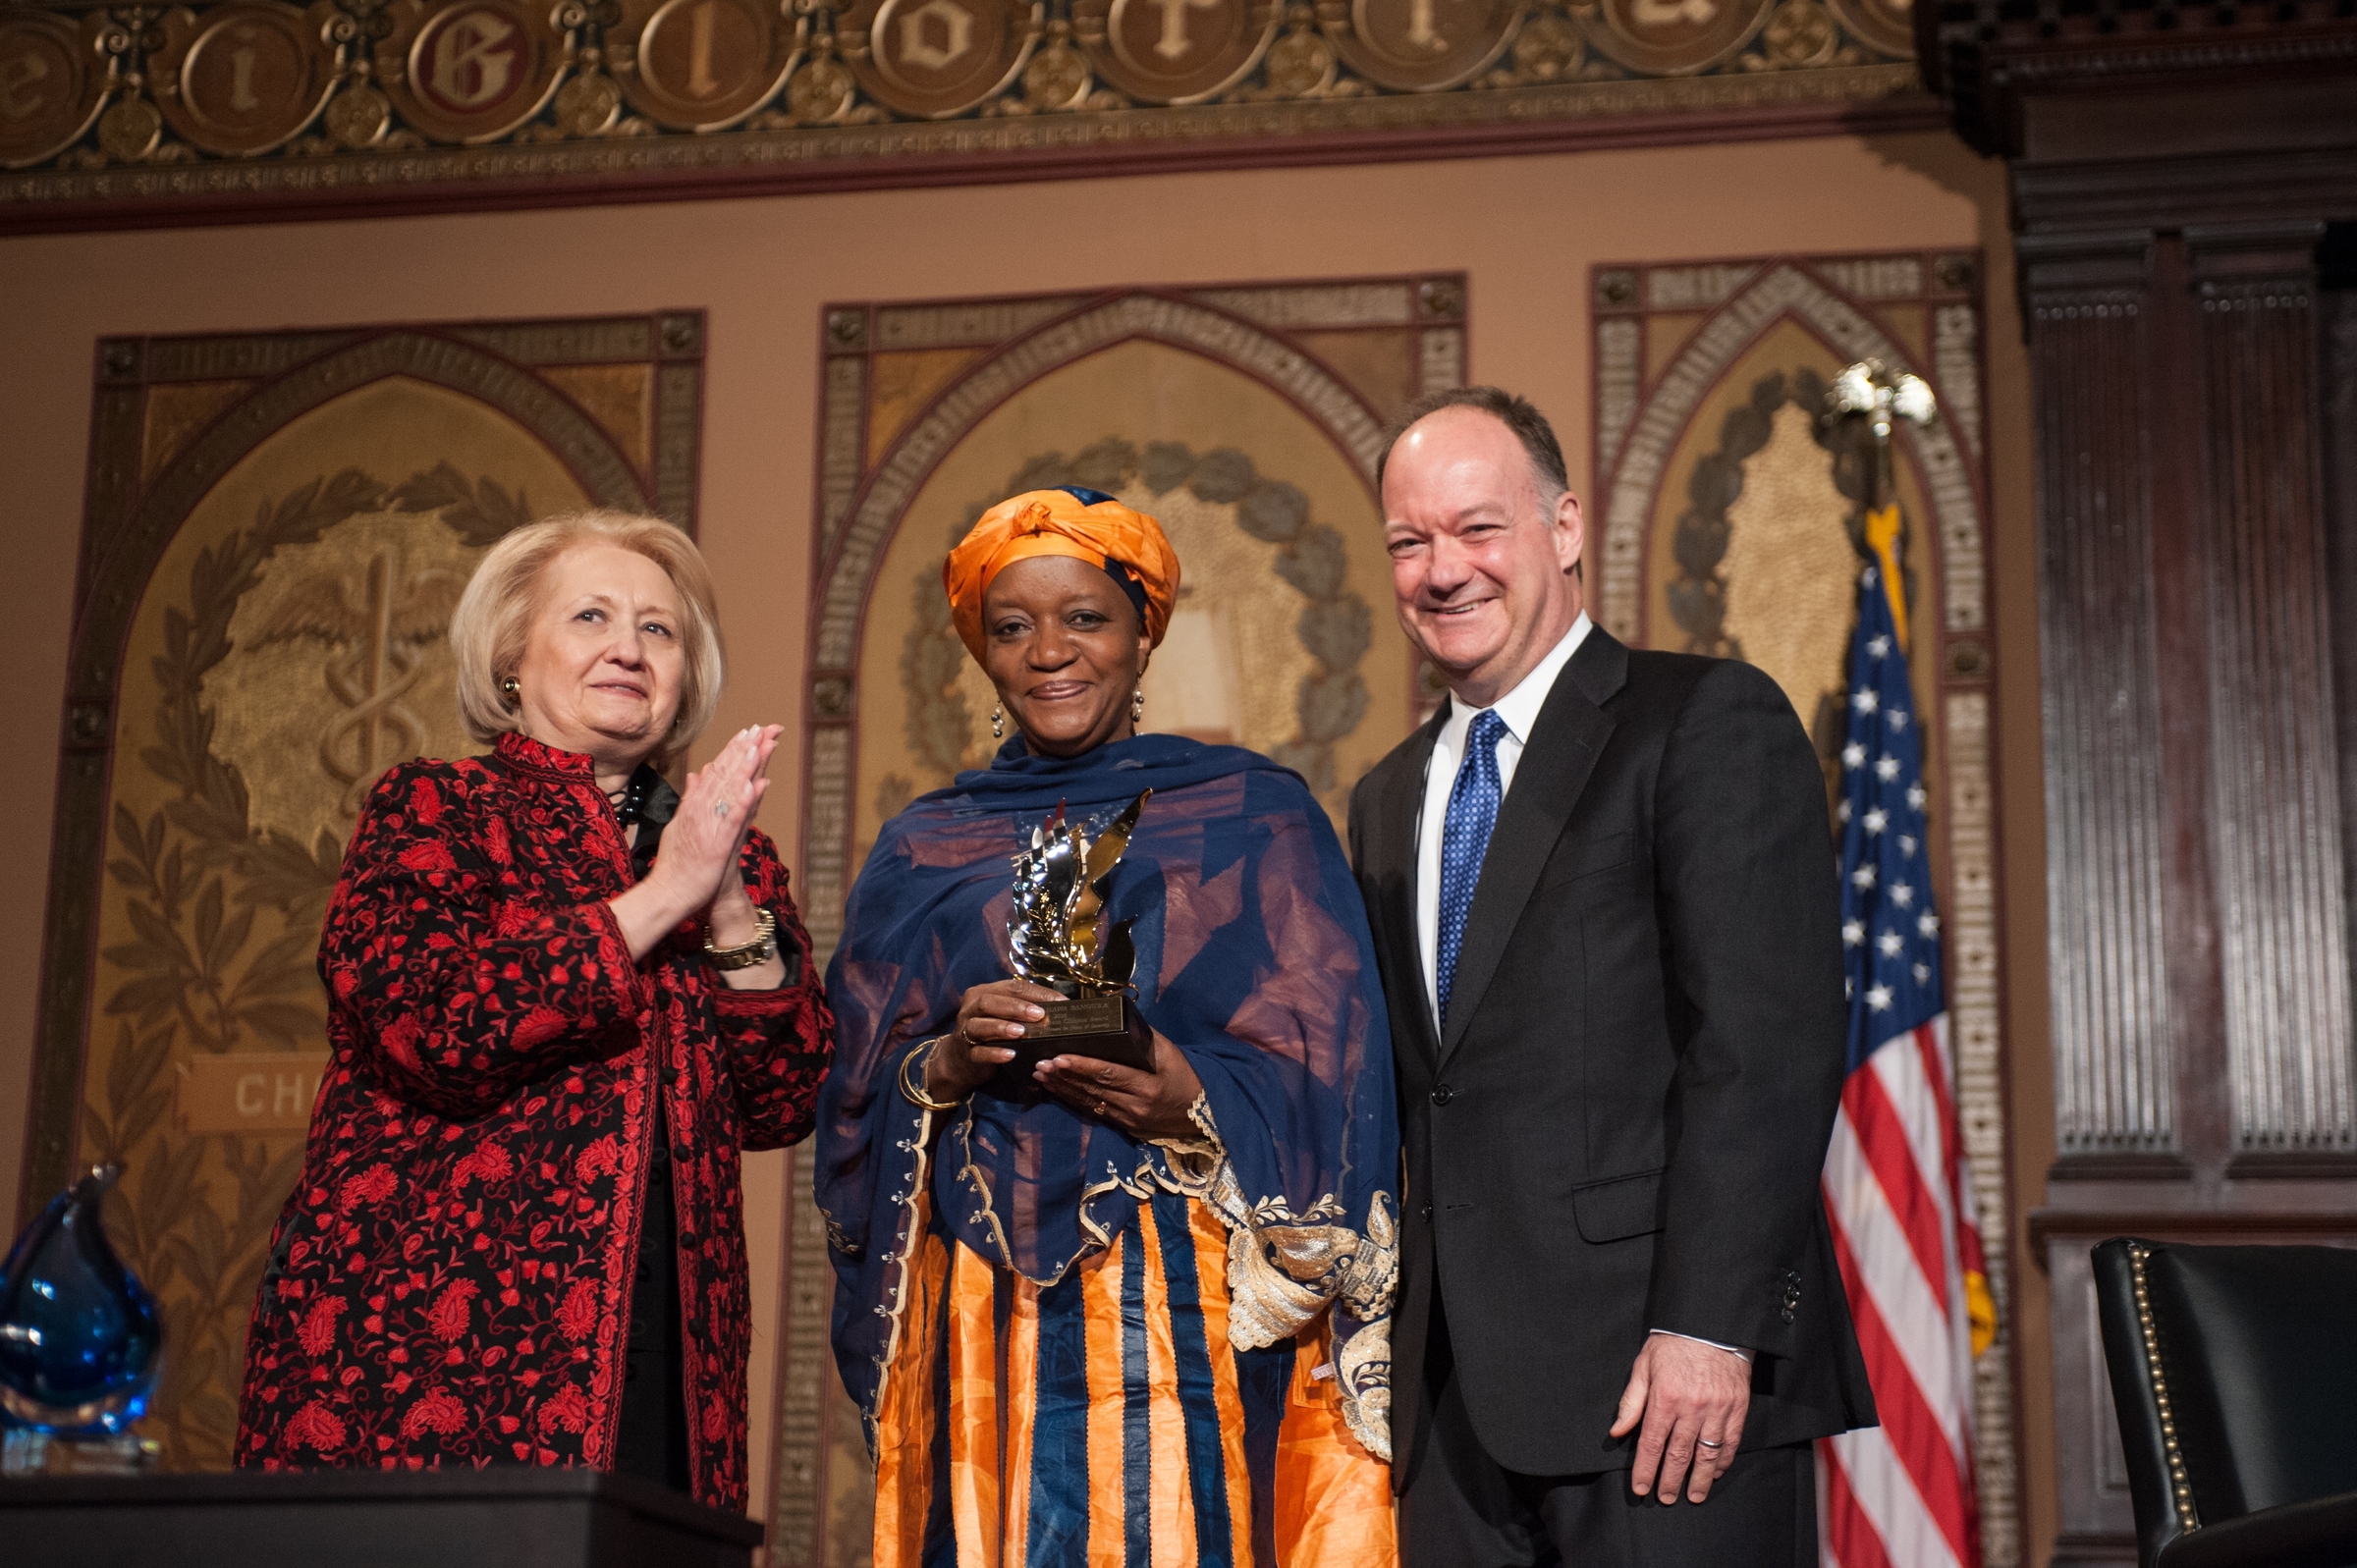 From left: Melanne Verveer, executive director of the Georgetown Institute for Women, Peace and Security, Zainab Hawa Bangura, a U.N. special advisor, and Georgetown University president John DeGioia (Leslie E. Kossoff/Georgetown University)